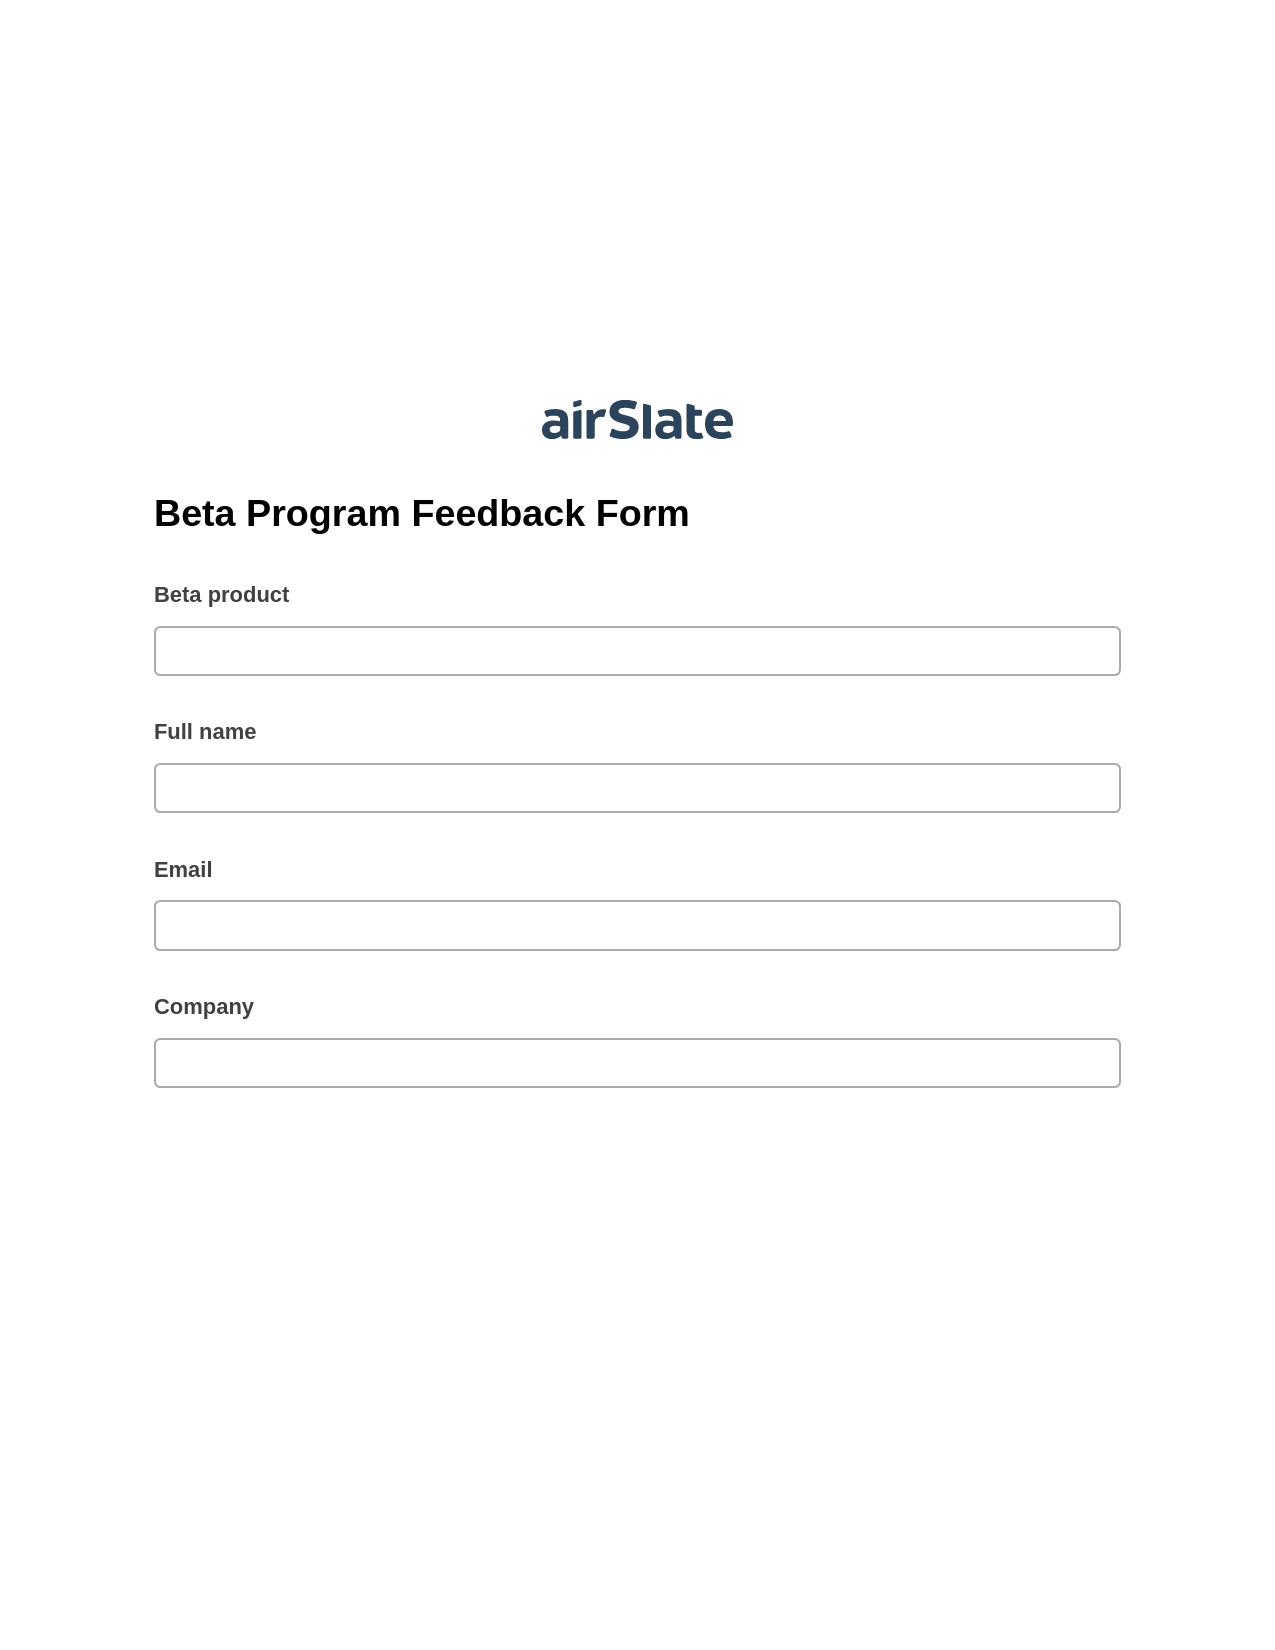 Multirole Beta Program Feedback Form Pre-fill Slate from MS Dynamics 365 Records Bot, Send a Slate with Roles Bot, Google Drive Bot